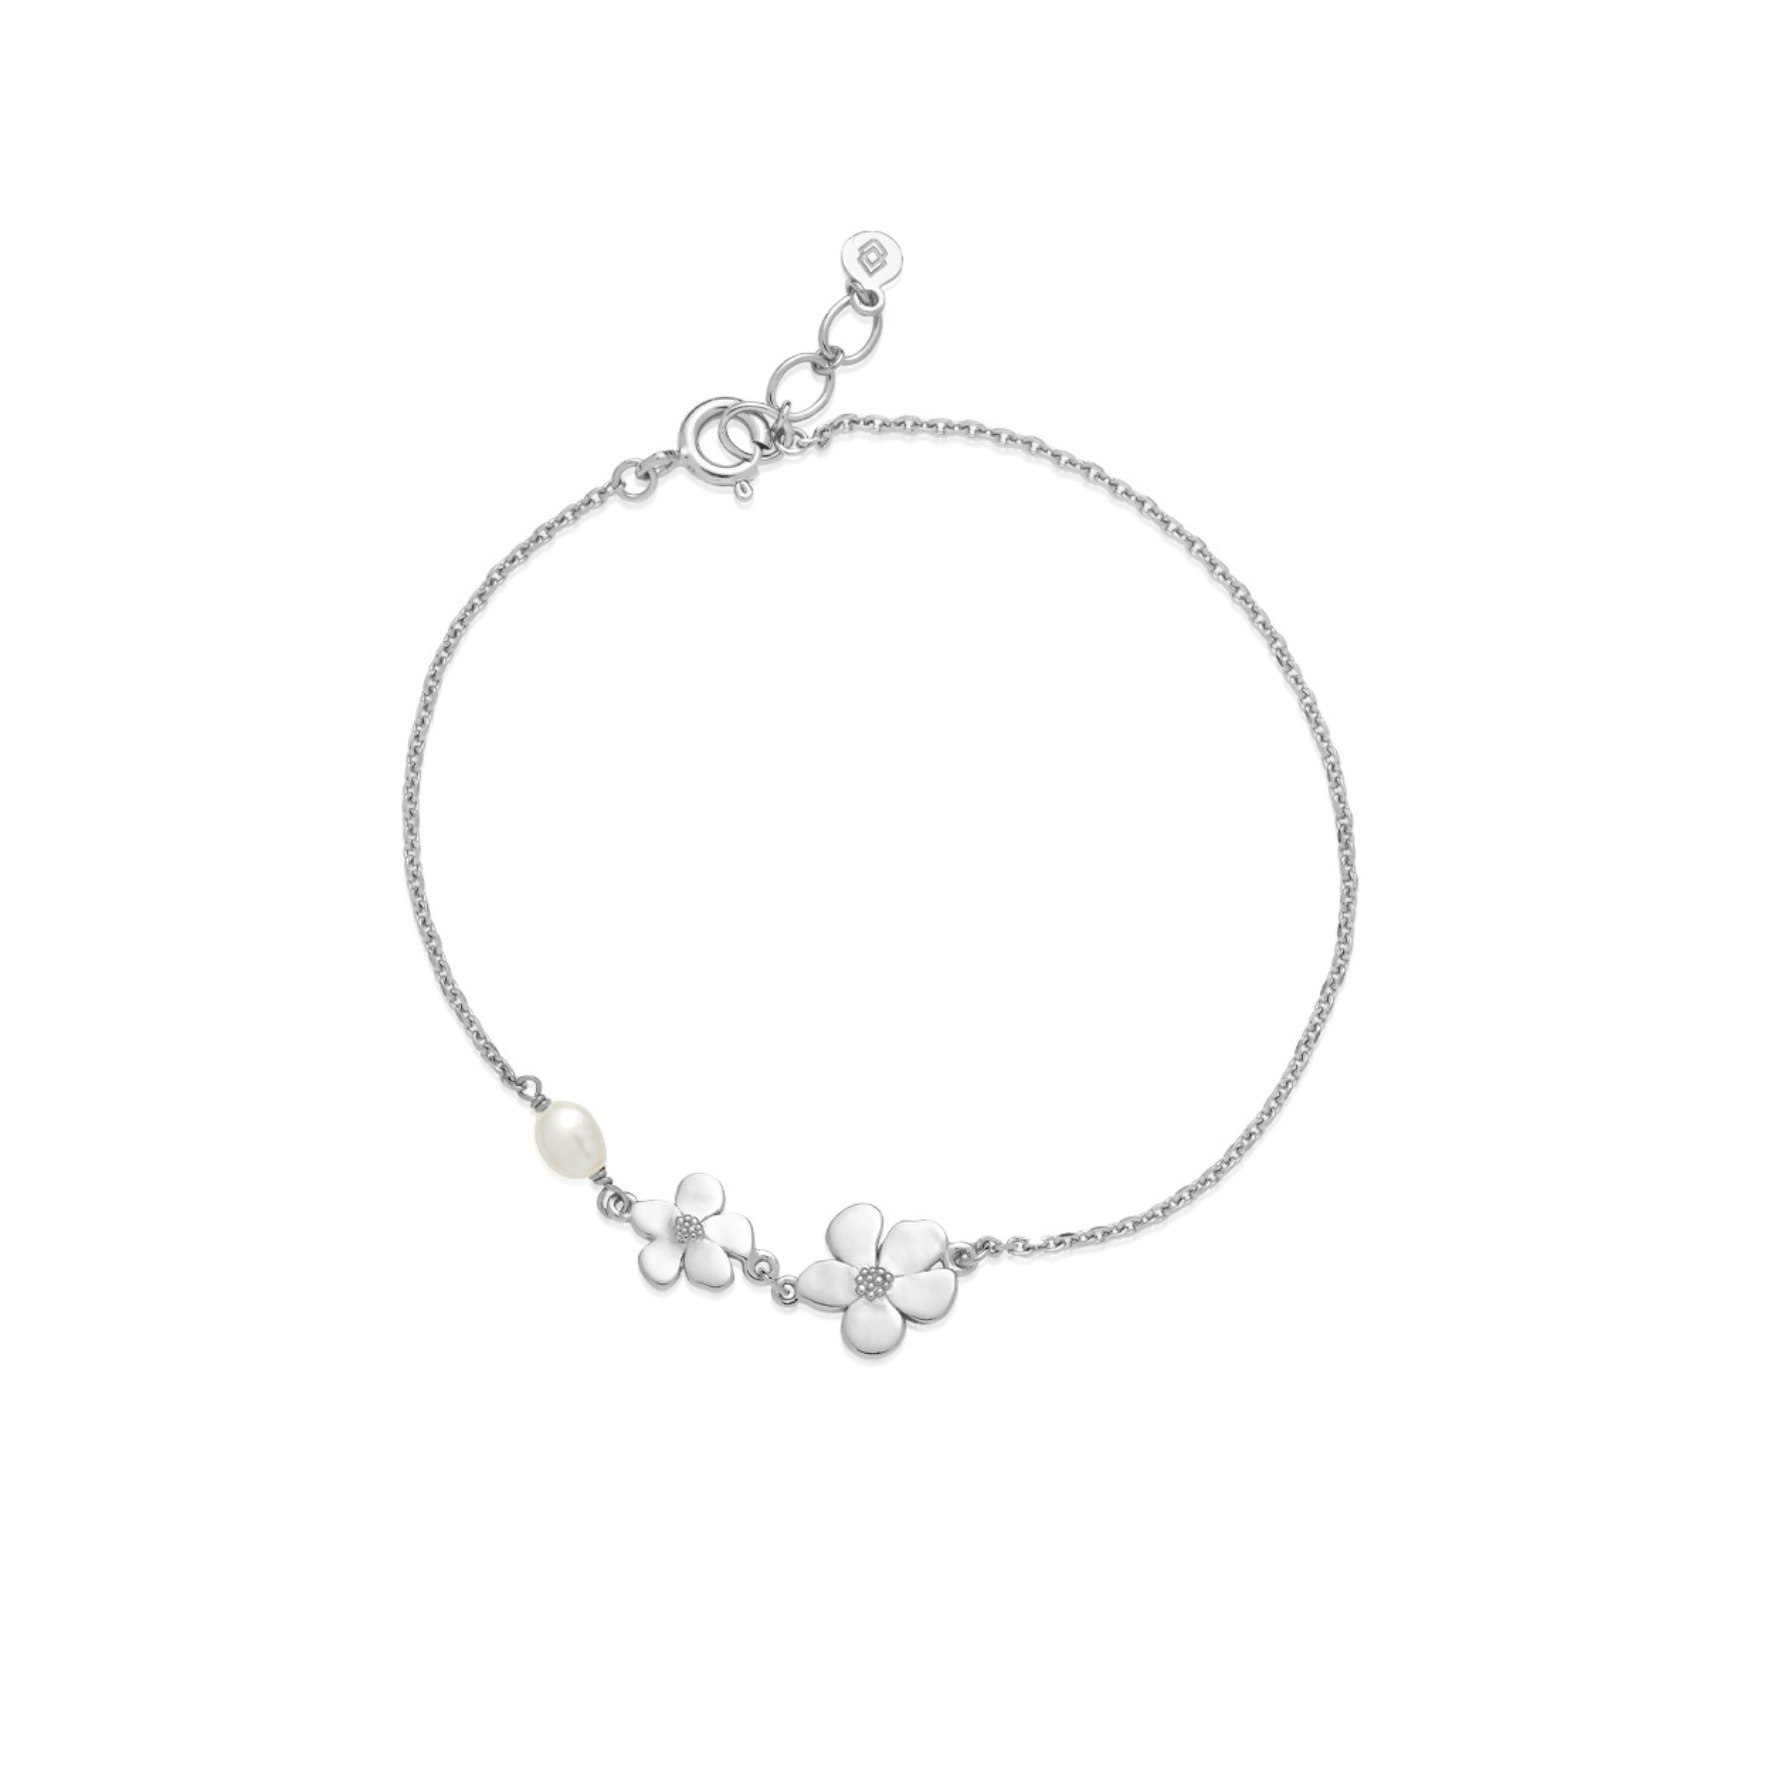 Pansy Bracelet from Izabel Camille in Silver Sterling 925